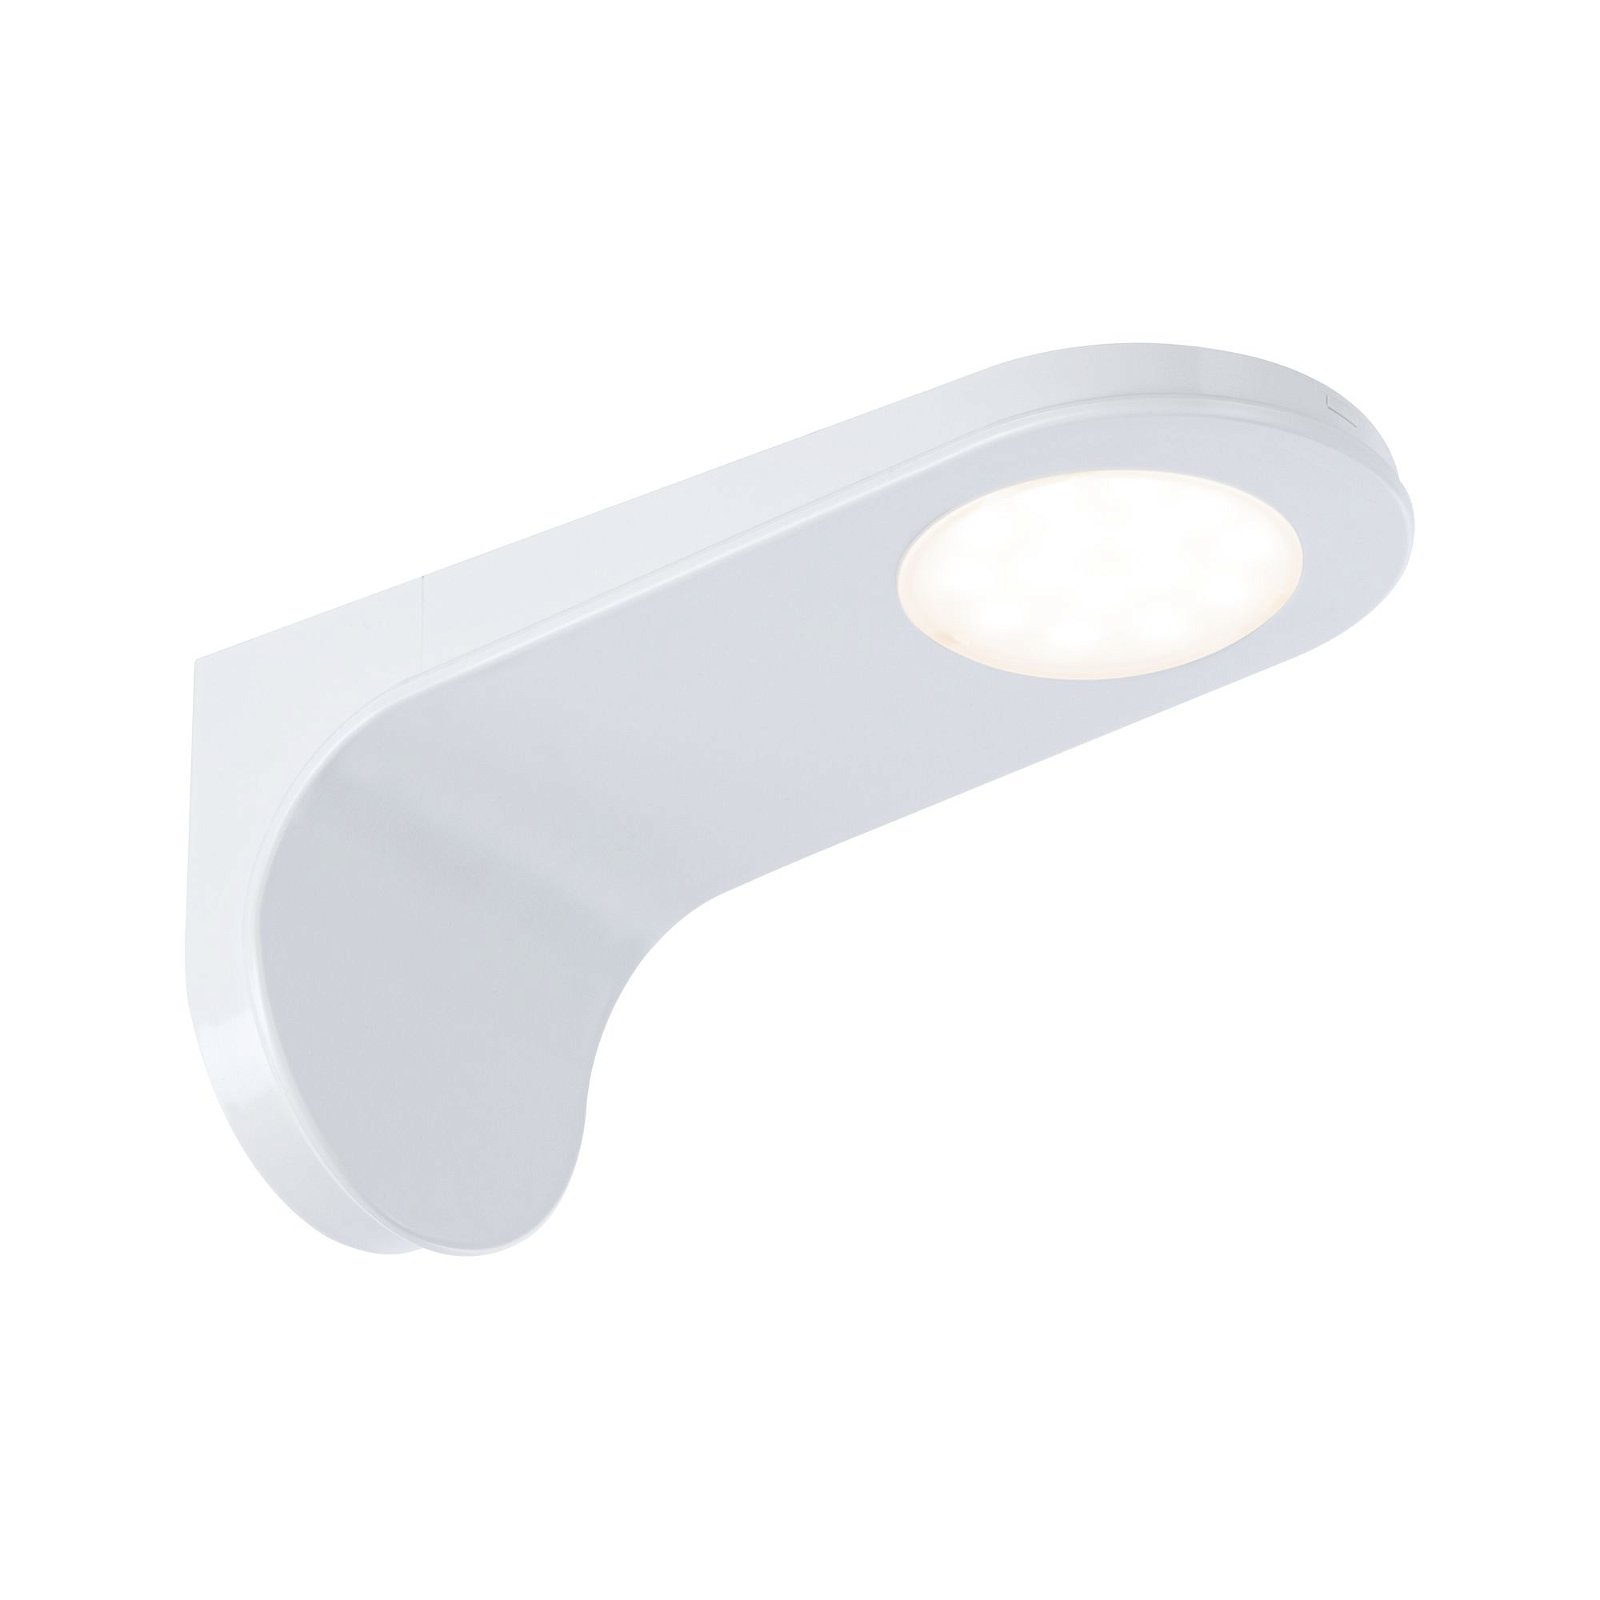 Clever Connect LED Spot Neda Tunable White 2,1W Weiß matt